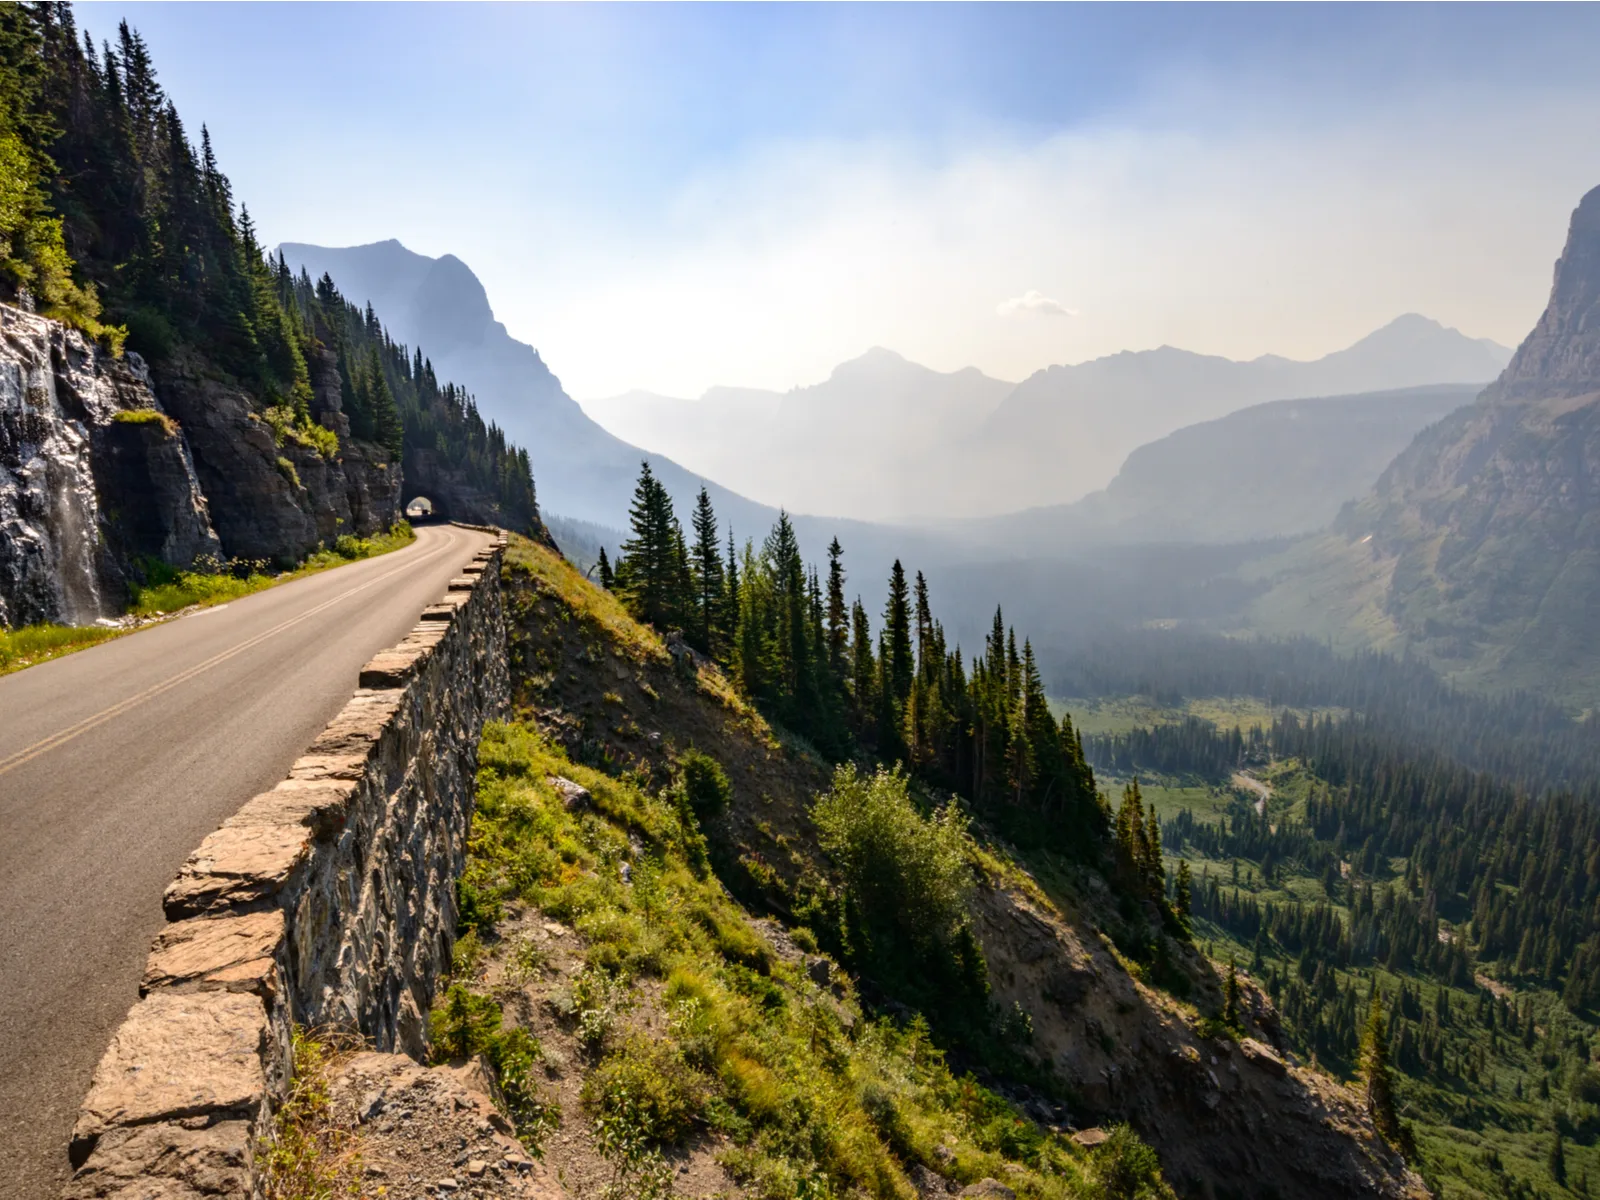 Cool tunnel road pictured during the best time to visit Glacier National Park, with a smoky horizon obscuring most mountains